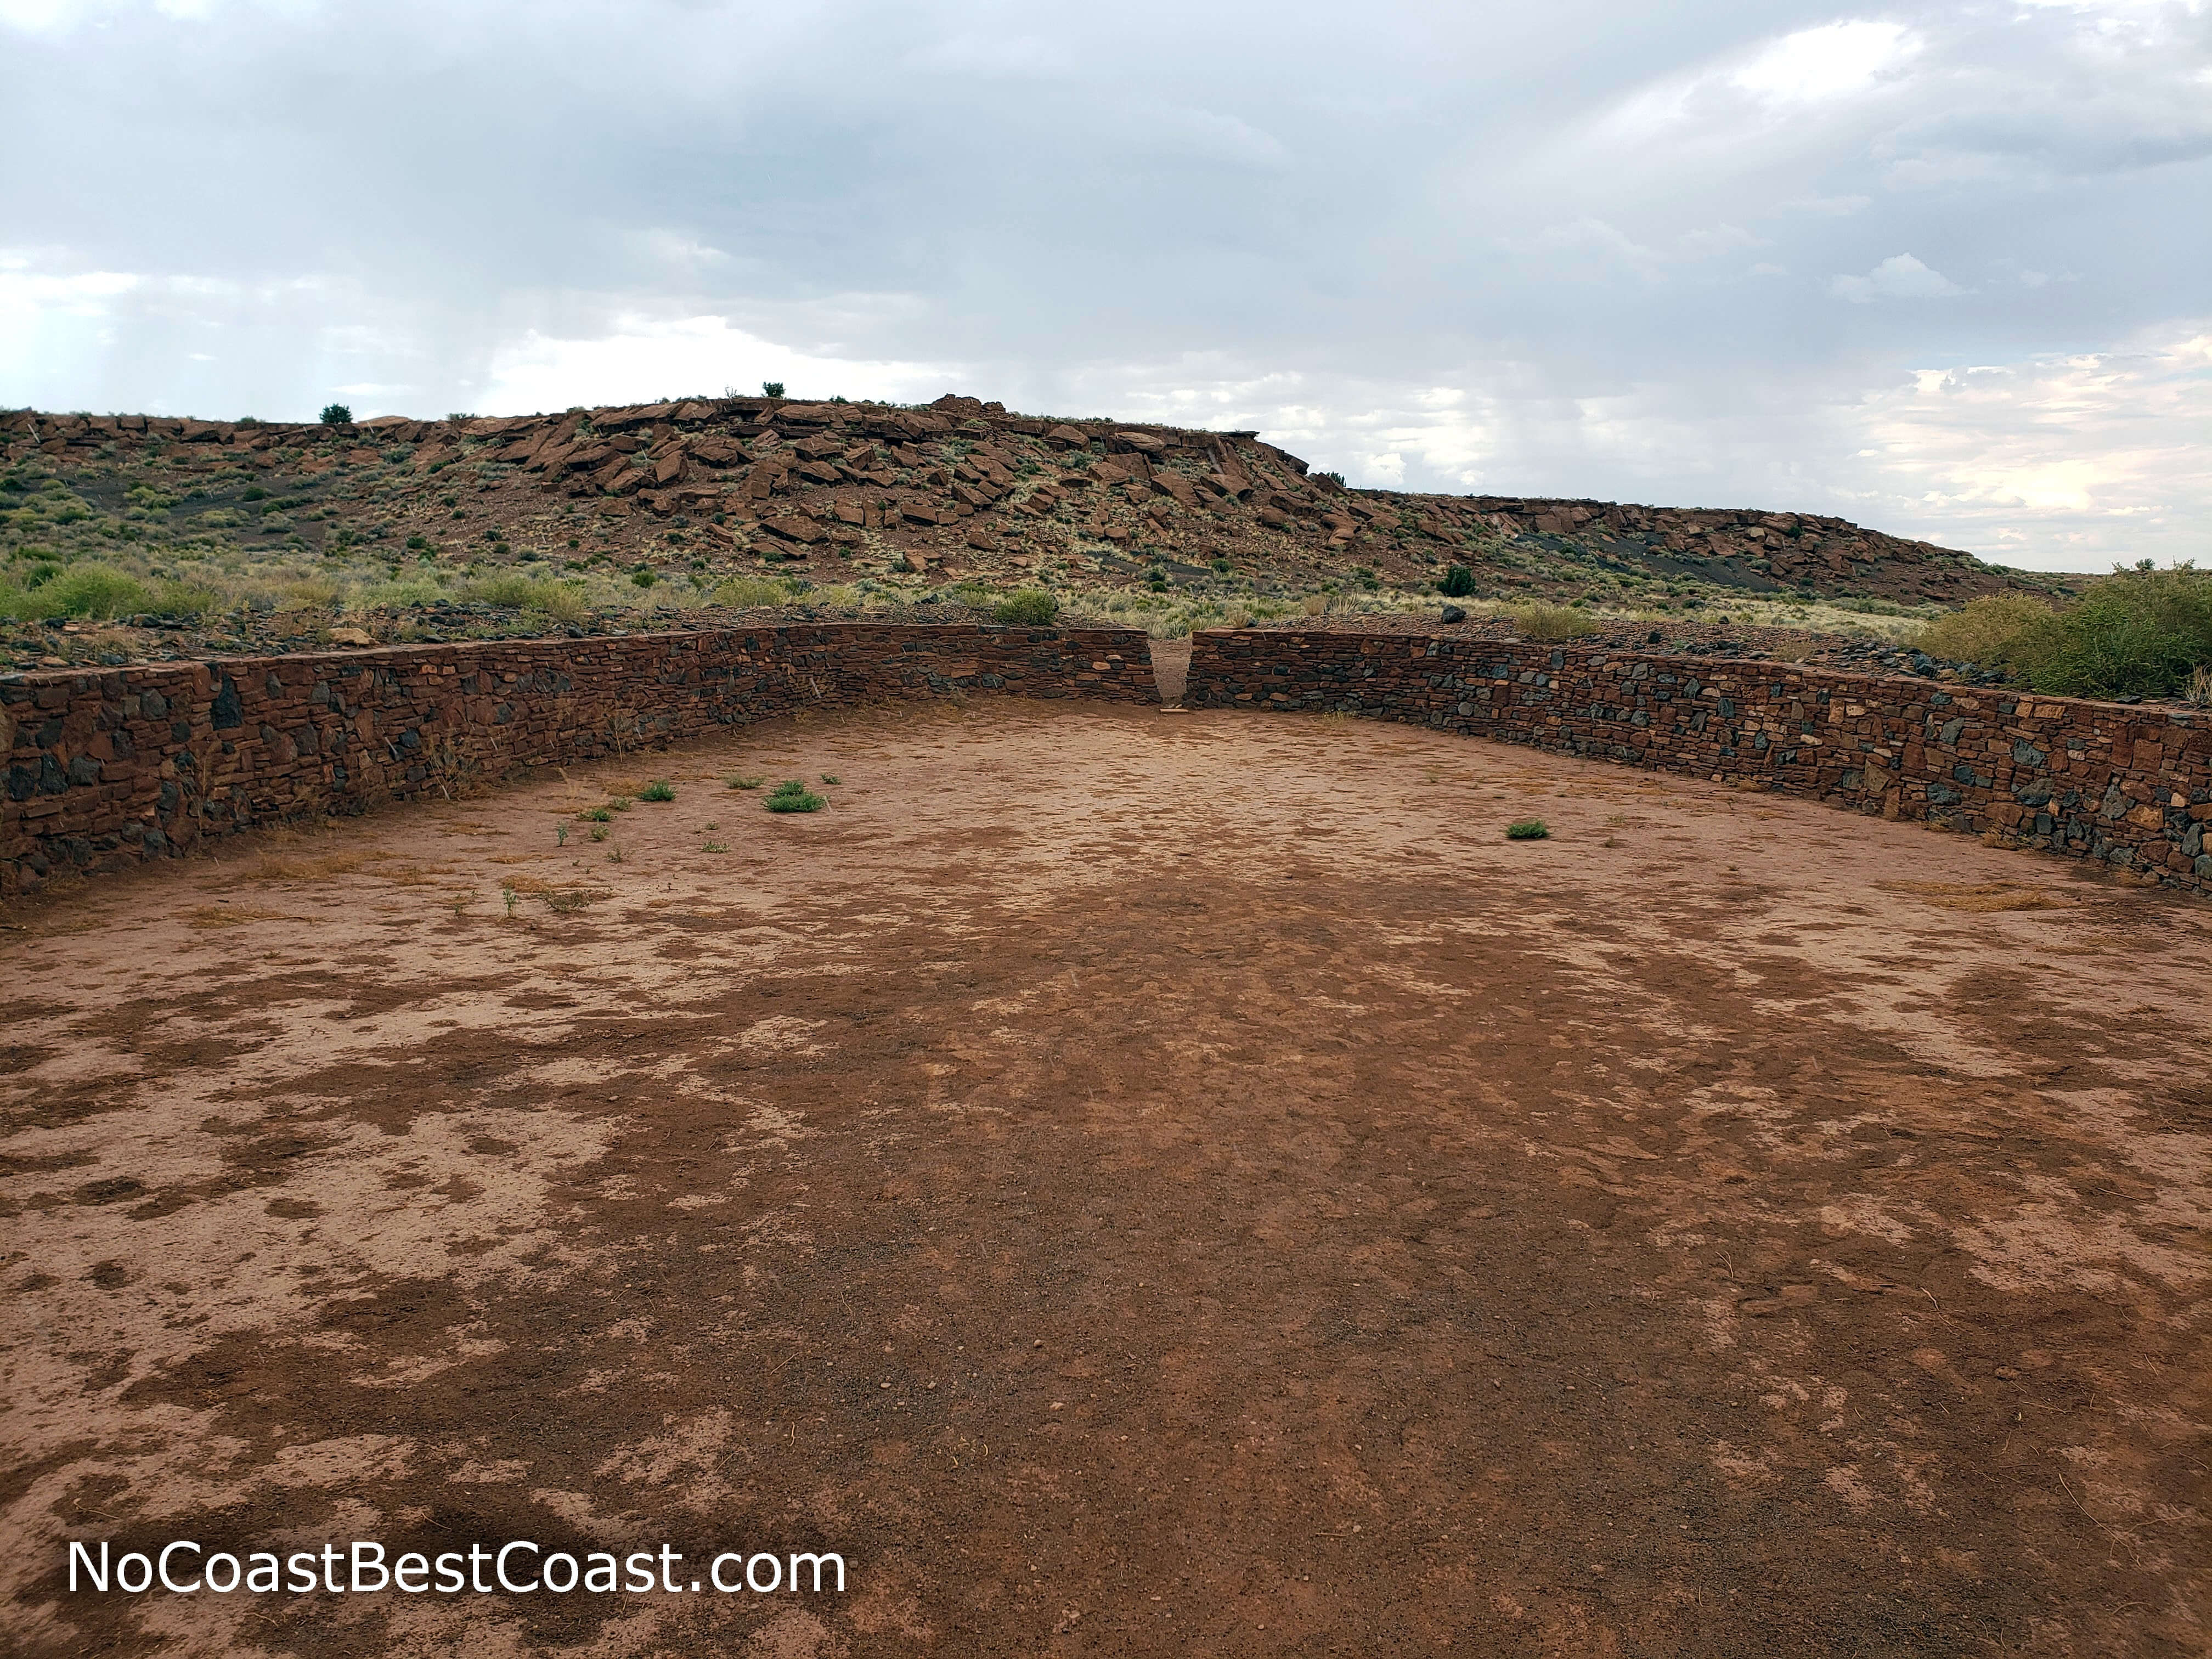 The remains of the northernmost ballcourt in North America